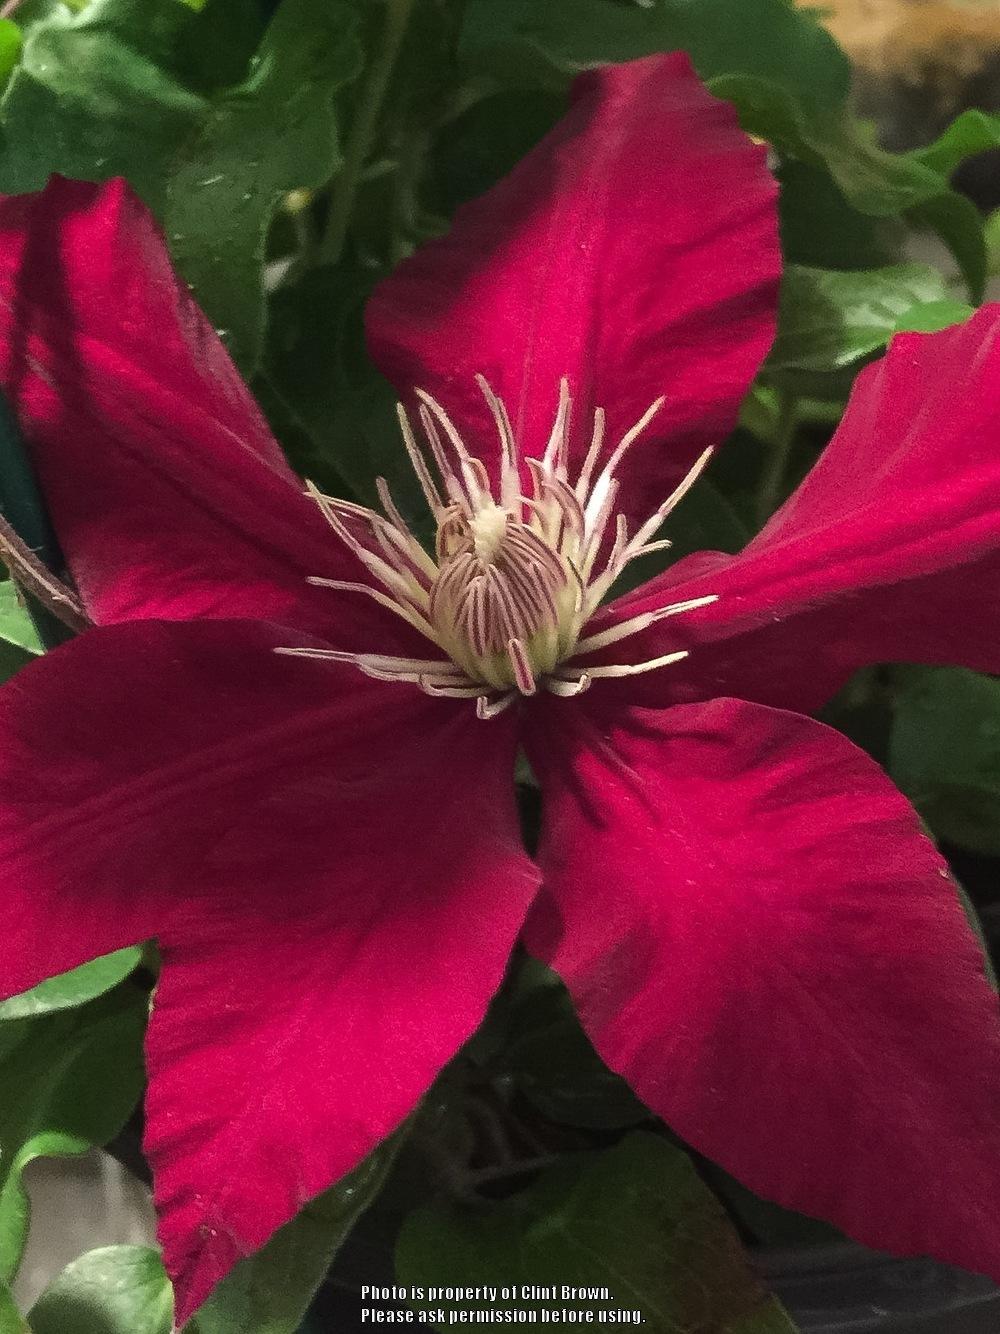 Photo of Clematis Rebecca™ uploaded by clintbrown